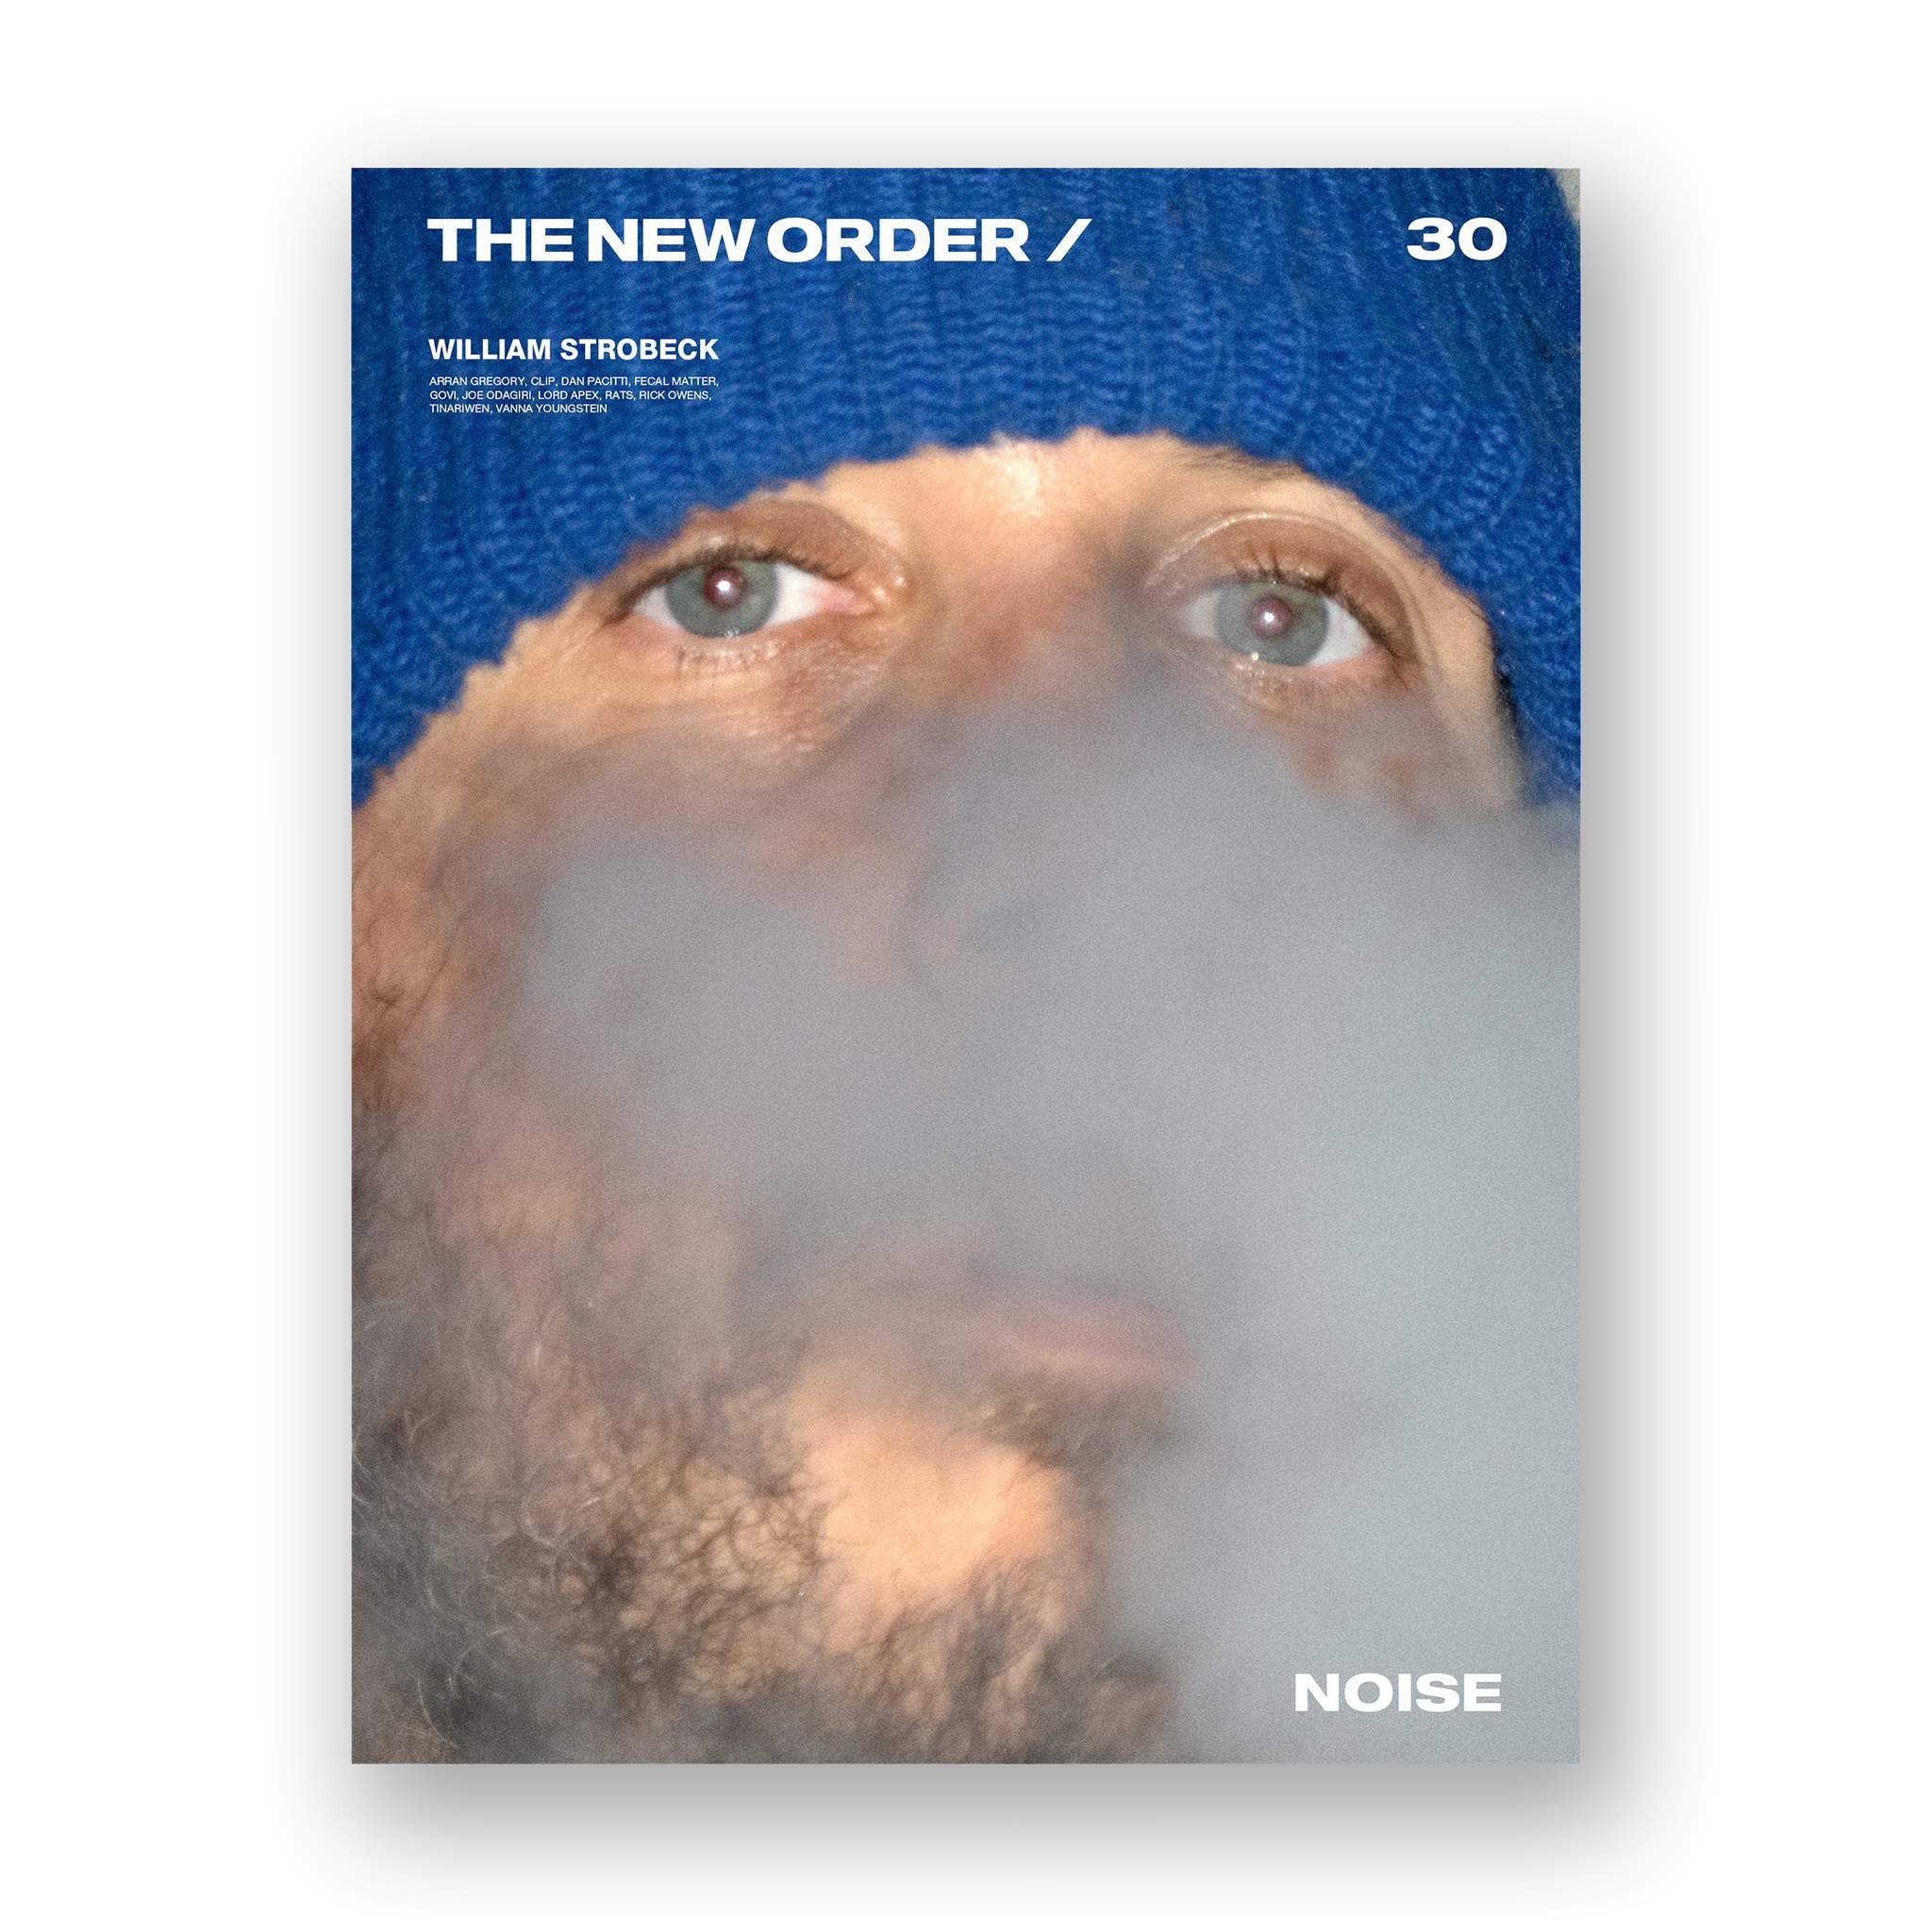 THE NEW ORDER ISSUE 30